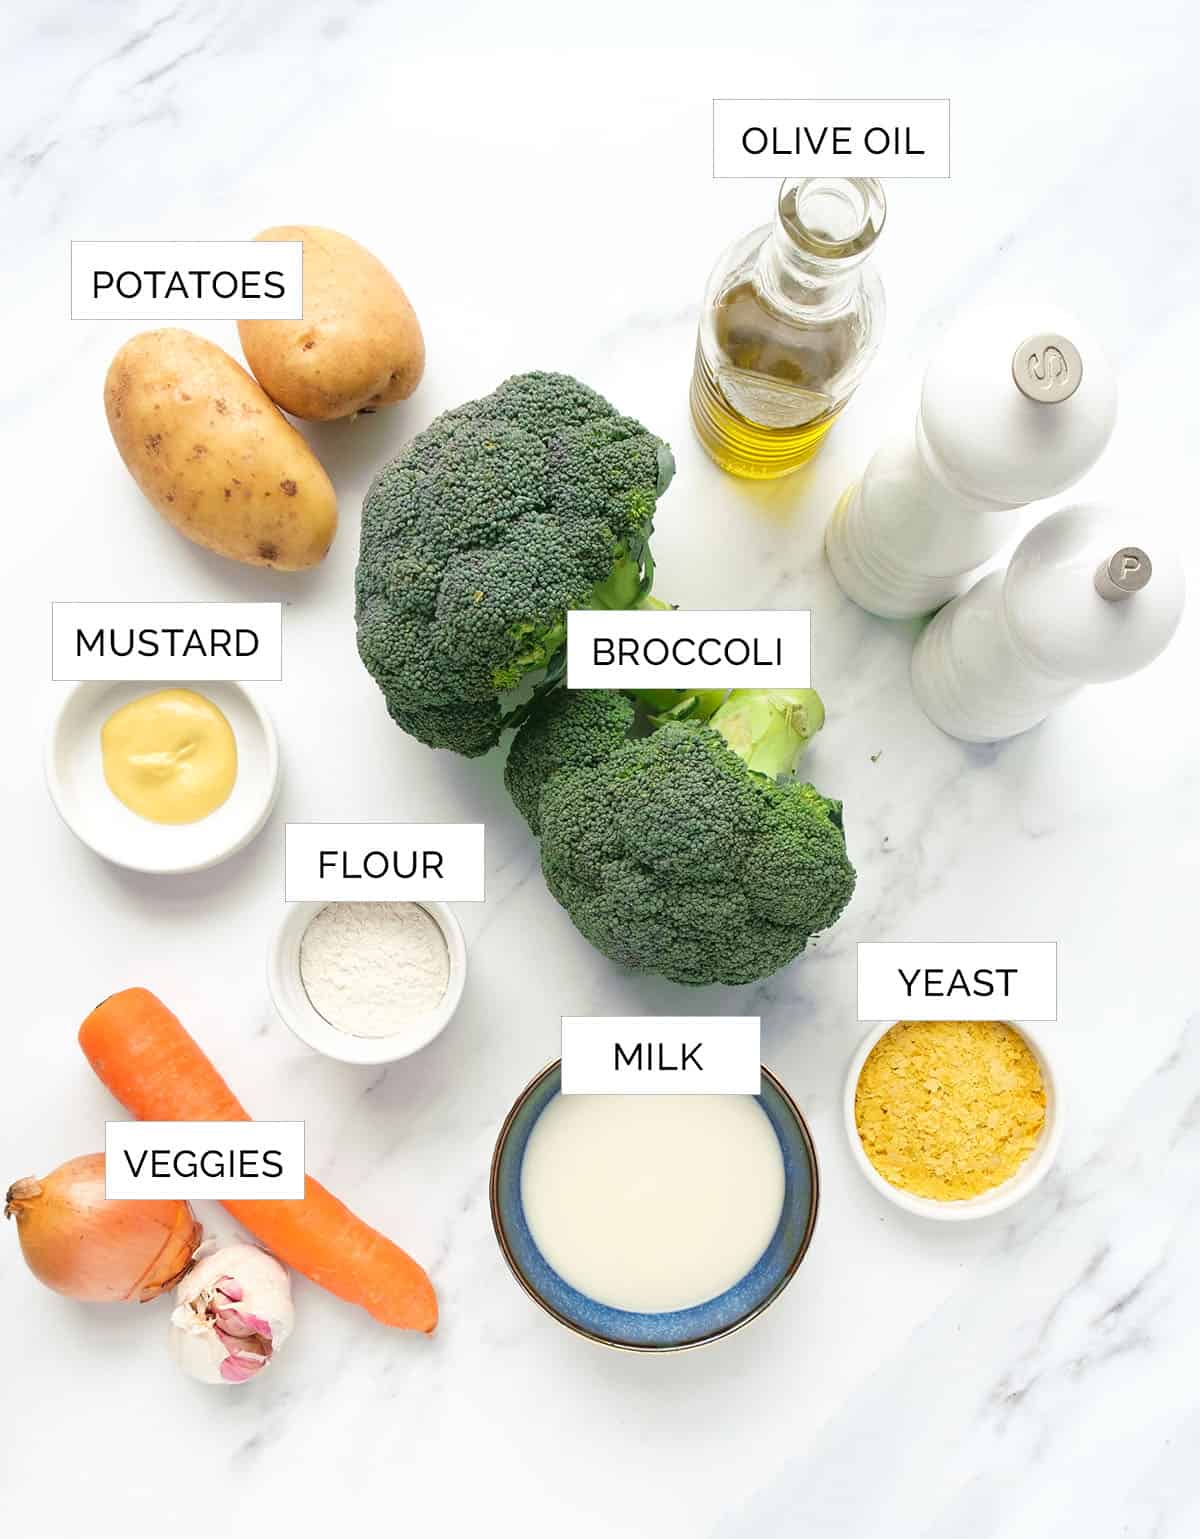 The ingredients to make this vegan broccoli soup are arrange over a white background.